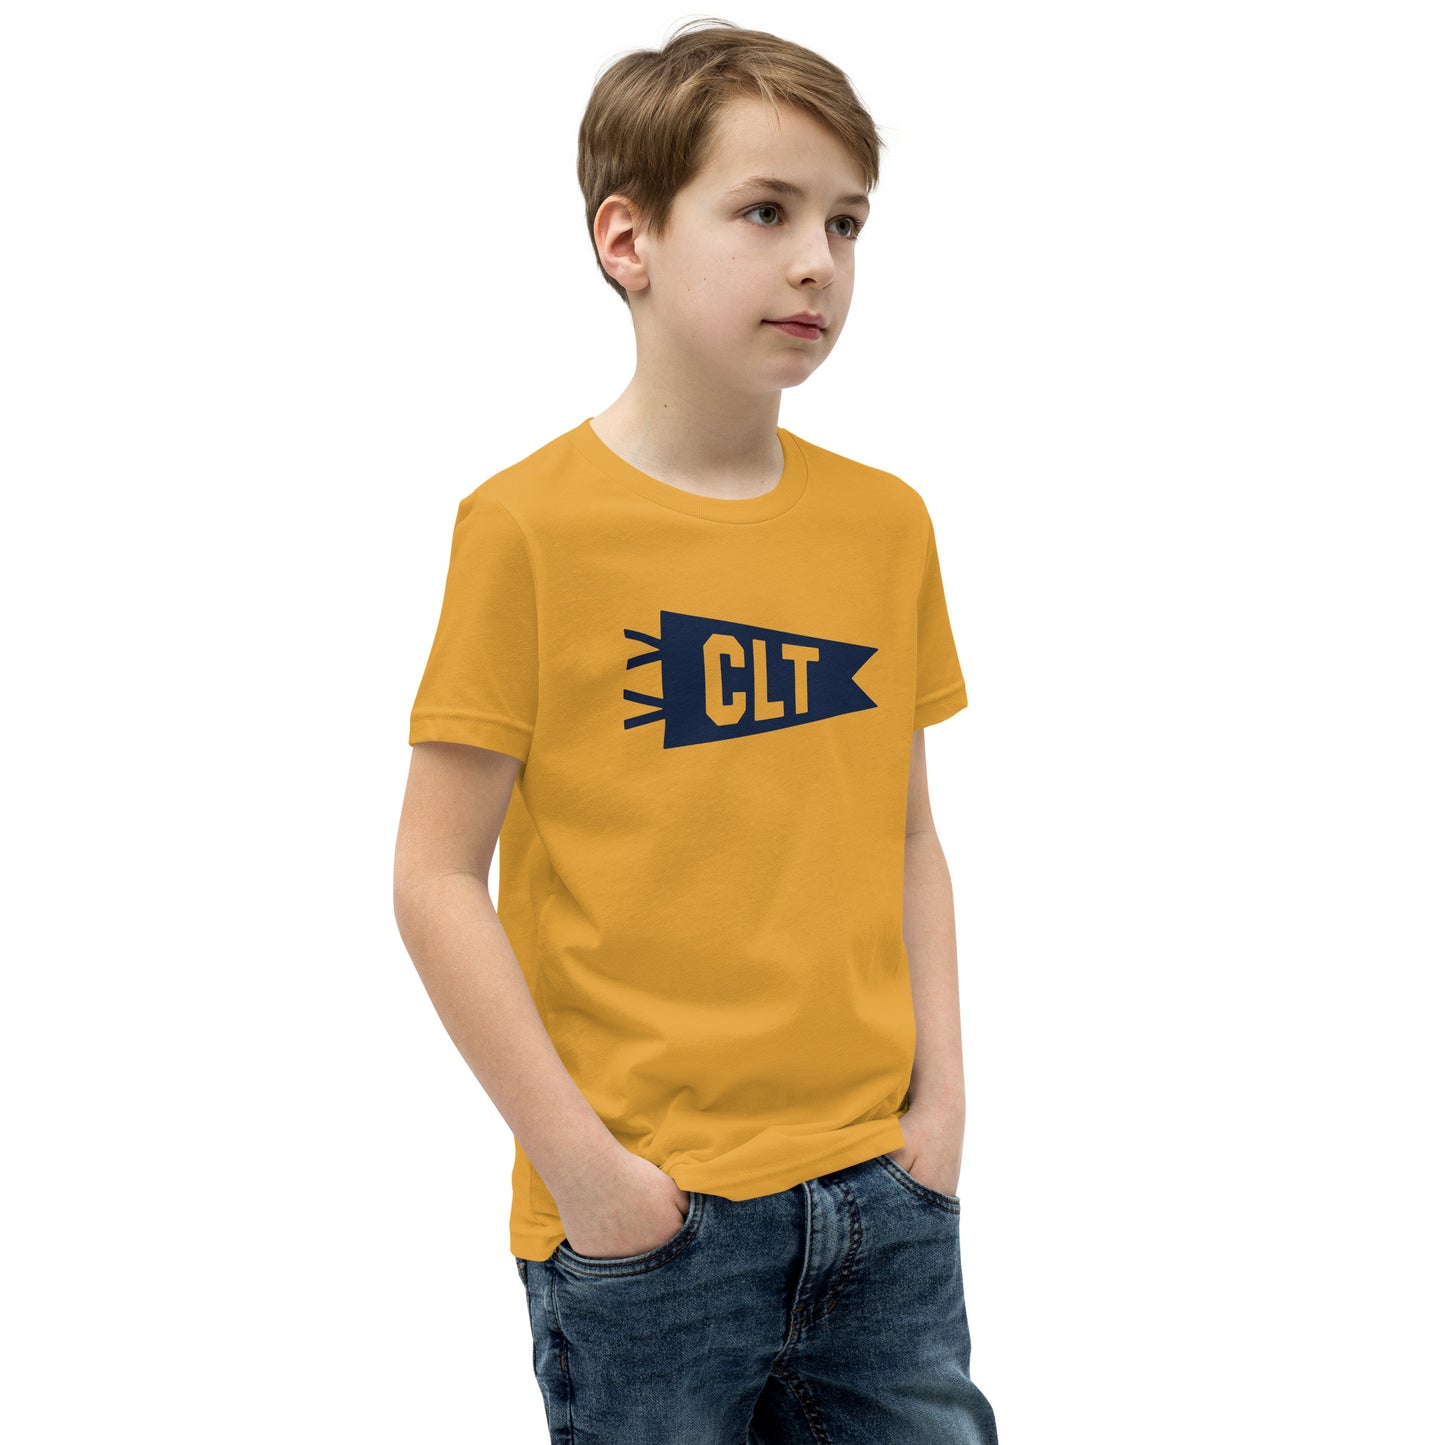 Kid's Airport Code Tee - Navy Blue Graphic • CLT Charlotte • YHM Designs - Image 07